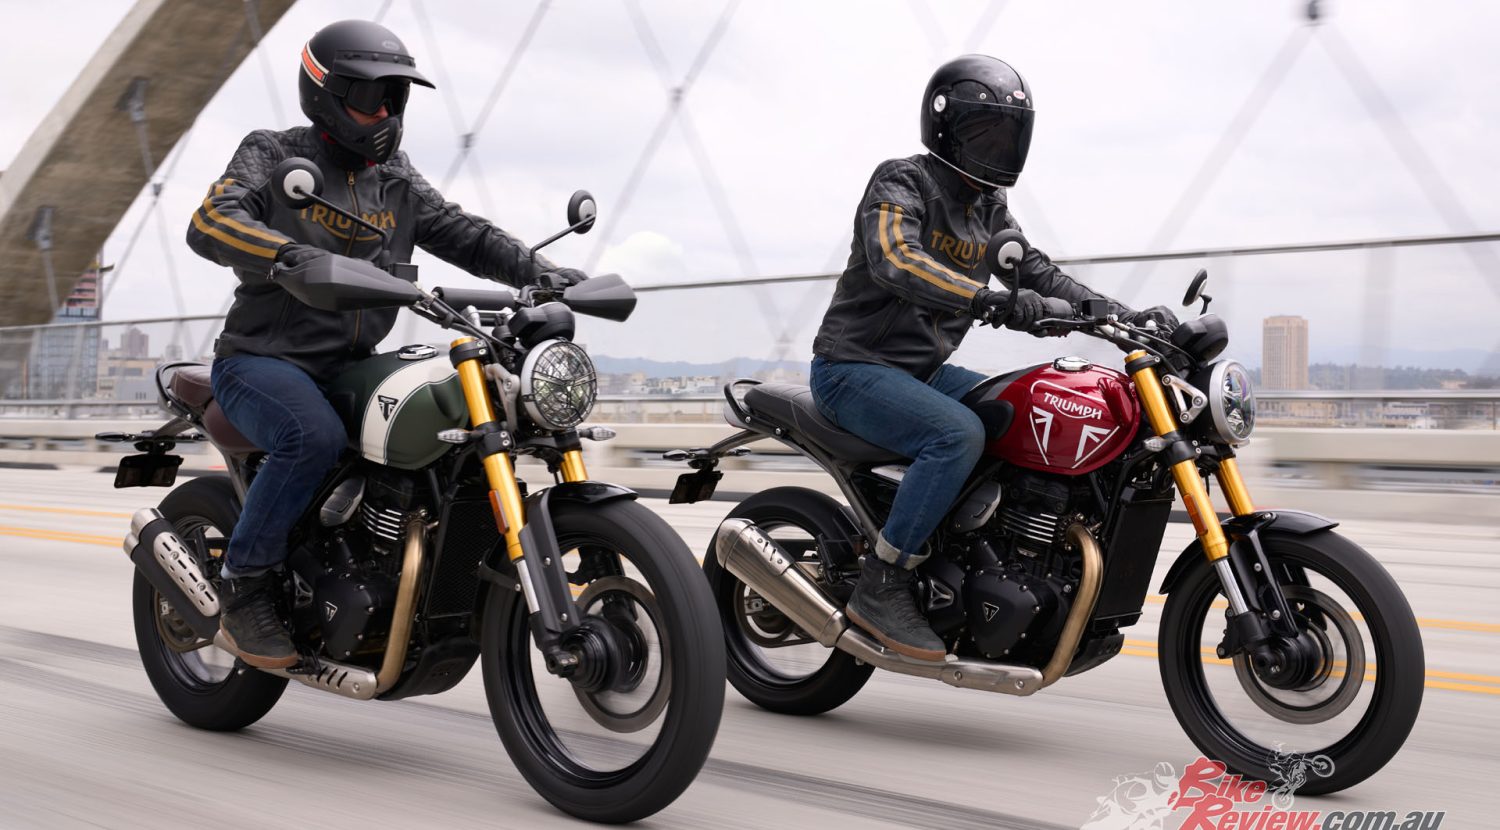 The Speed 400 roadster joins Triumph’s most successful modern classic line-up, the Speed Twin 900 and 1200 while the Scrambler 400 X takes its rugged design cues from the Scrambler 900 and 1200.